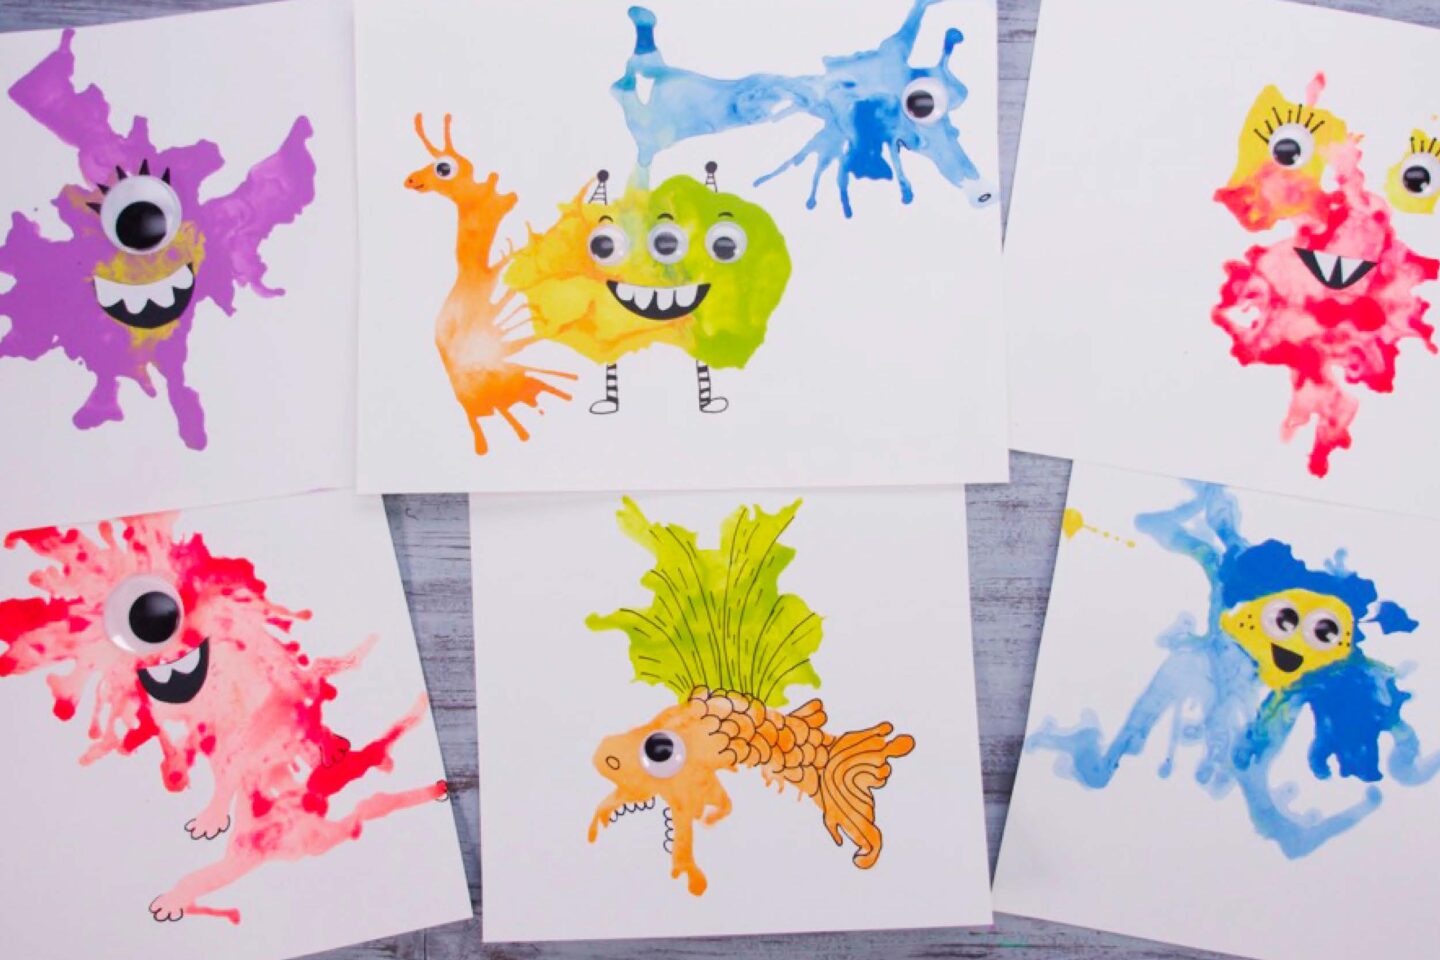 A photo showing one of the Halloween classroom ideas of painting monsters; 6 painted monsters are shown on individual papers with googly eyes and details like arms and scales drawn on with black marker.